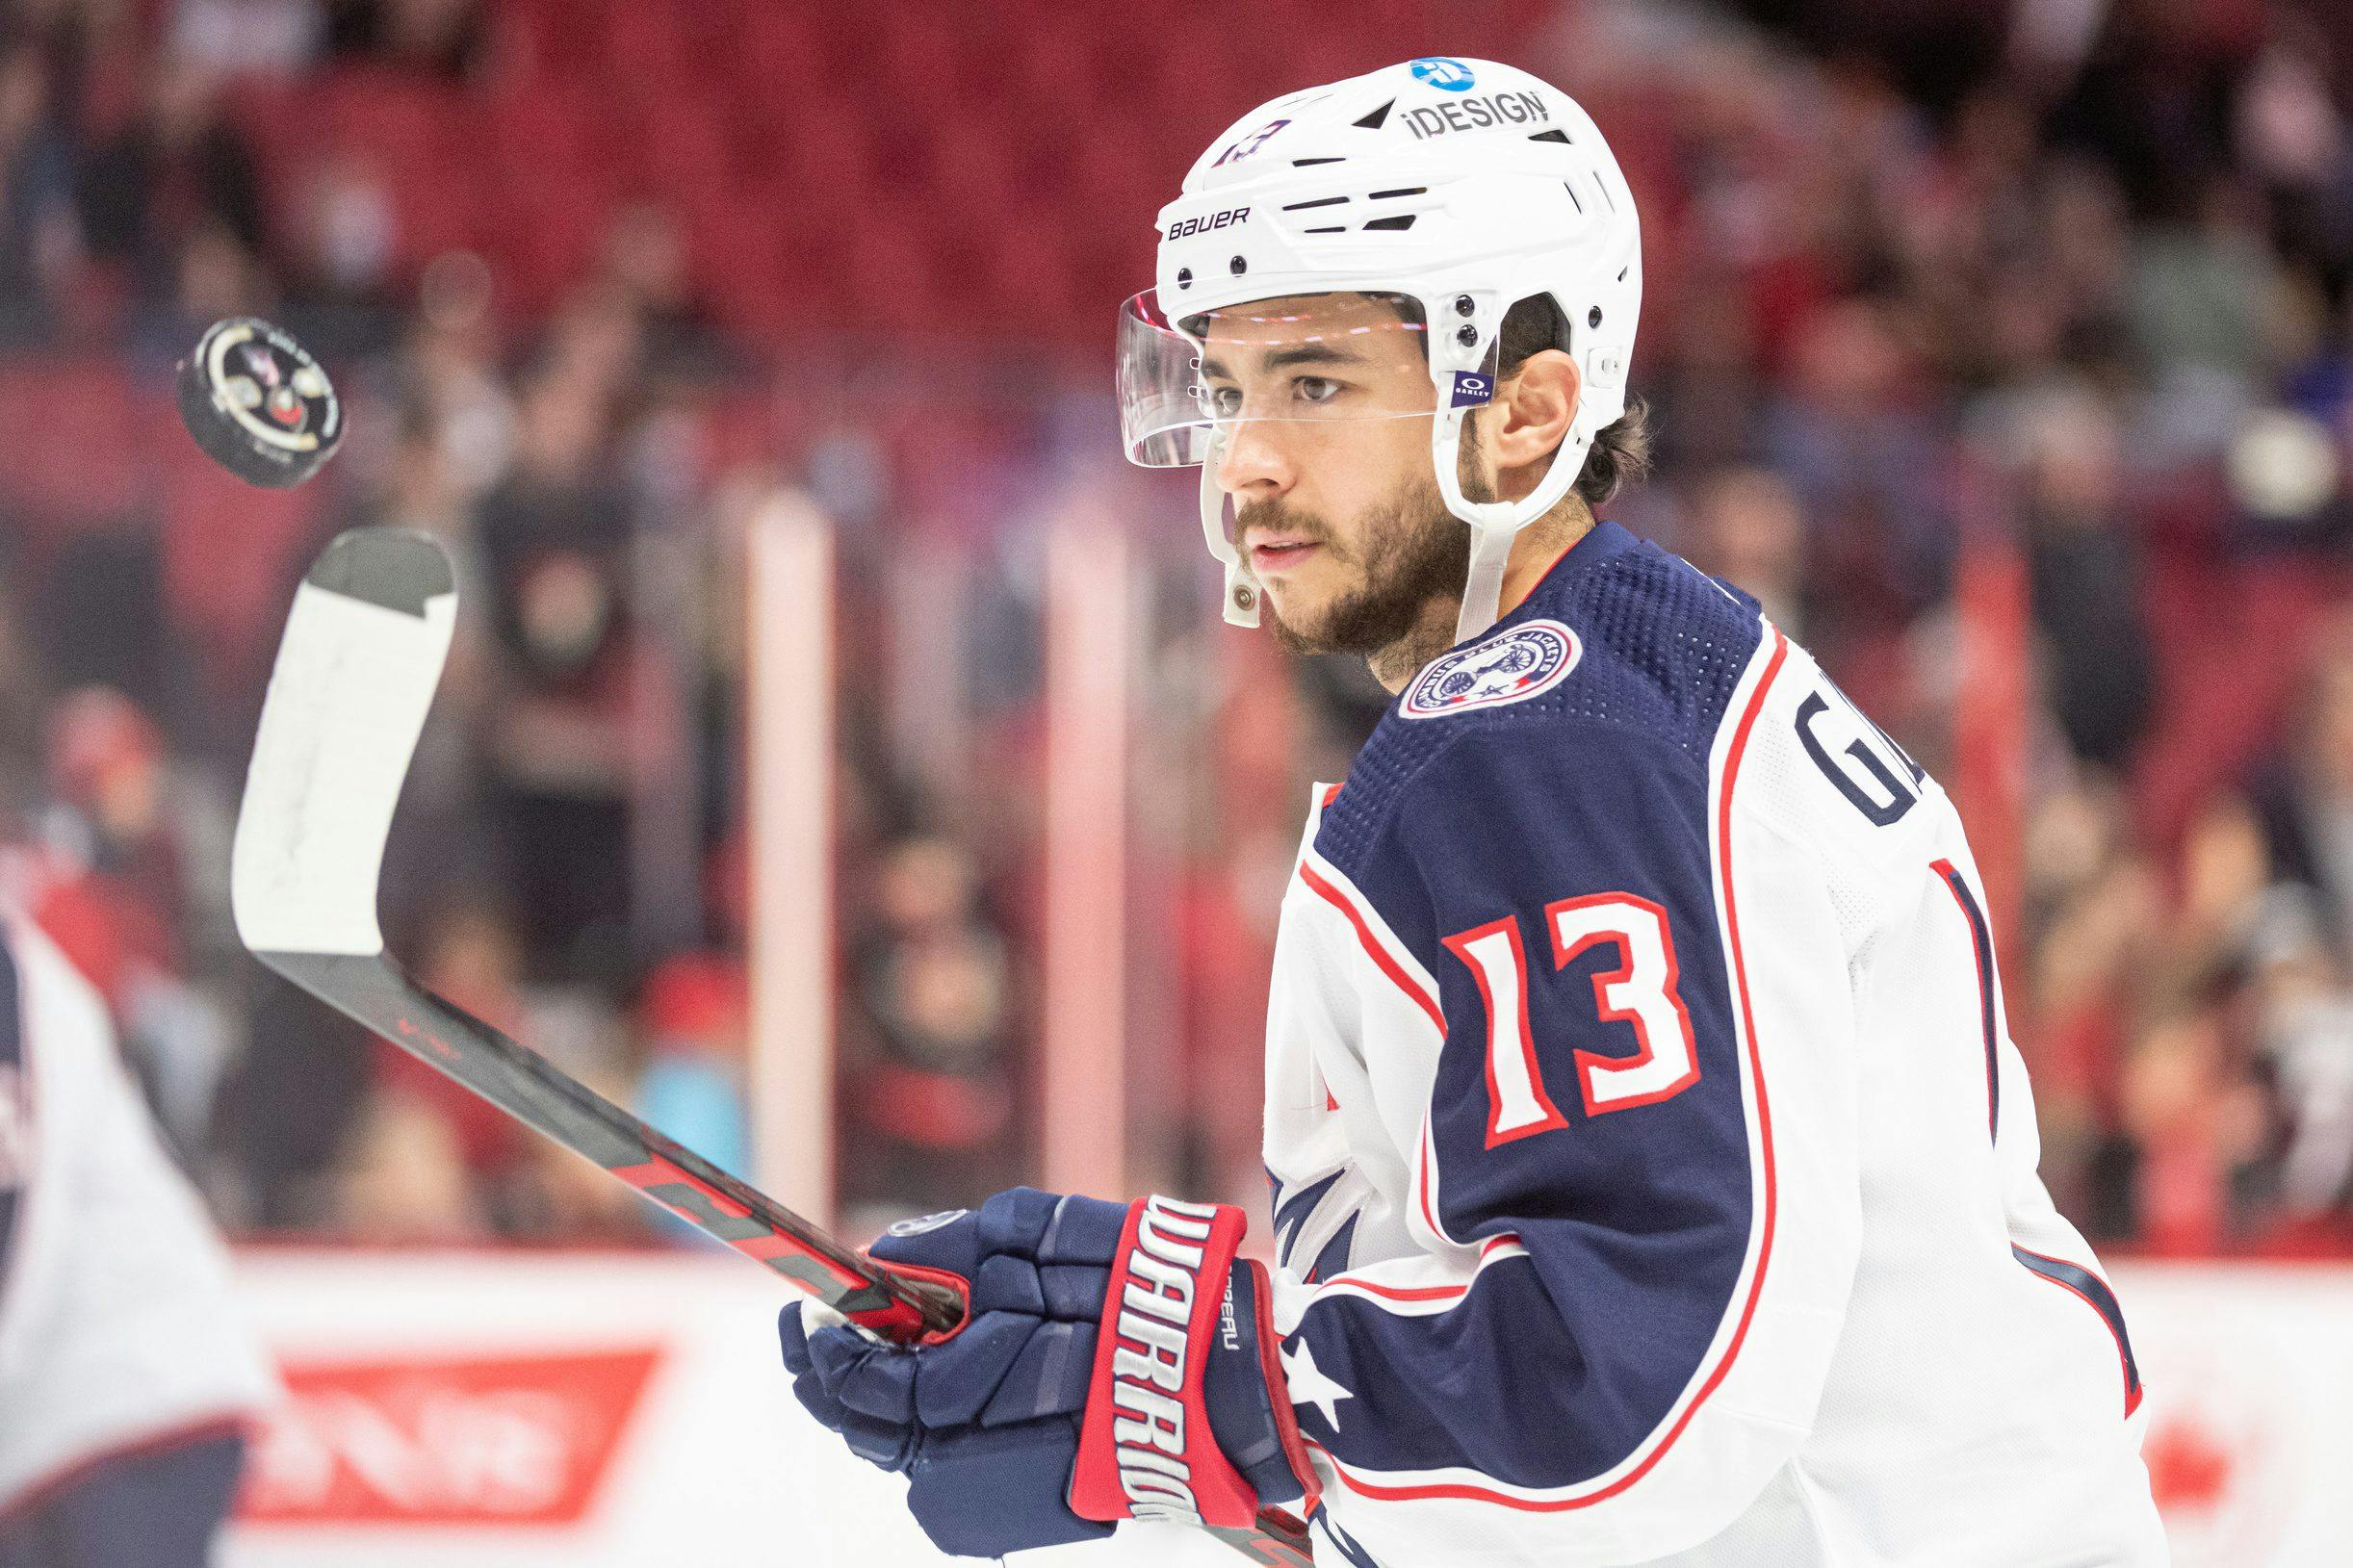 Columbus Blue Jackets star Johnny Gaudreau remains out with lower-body injury